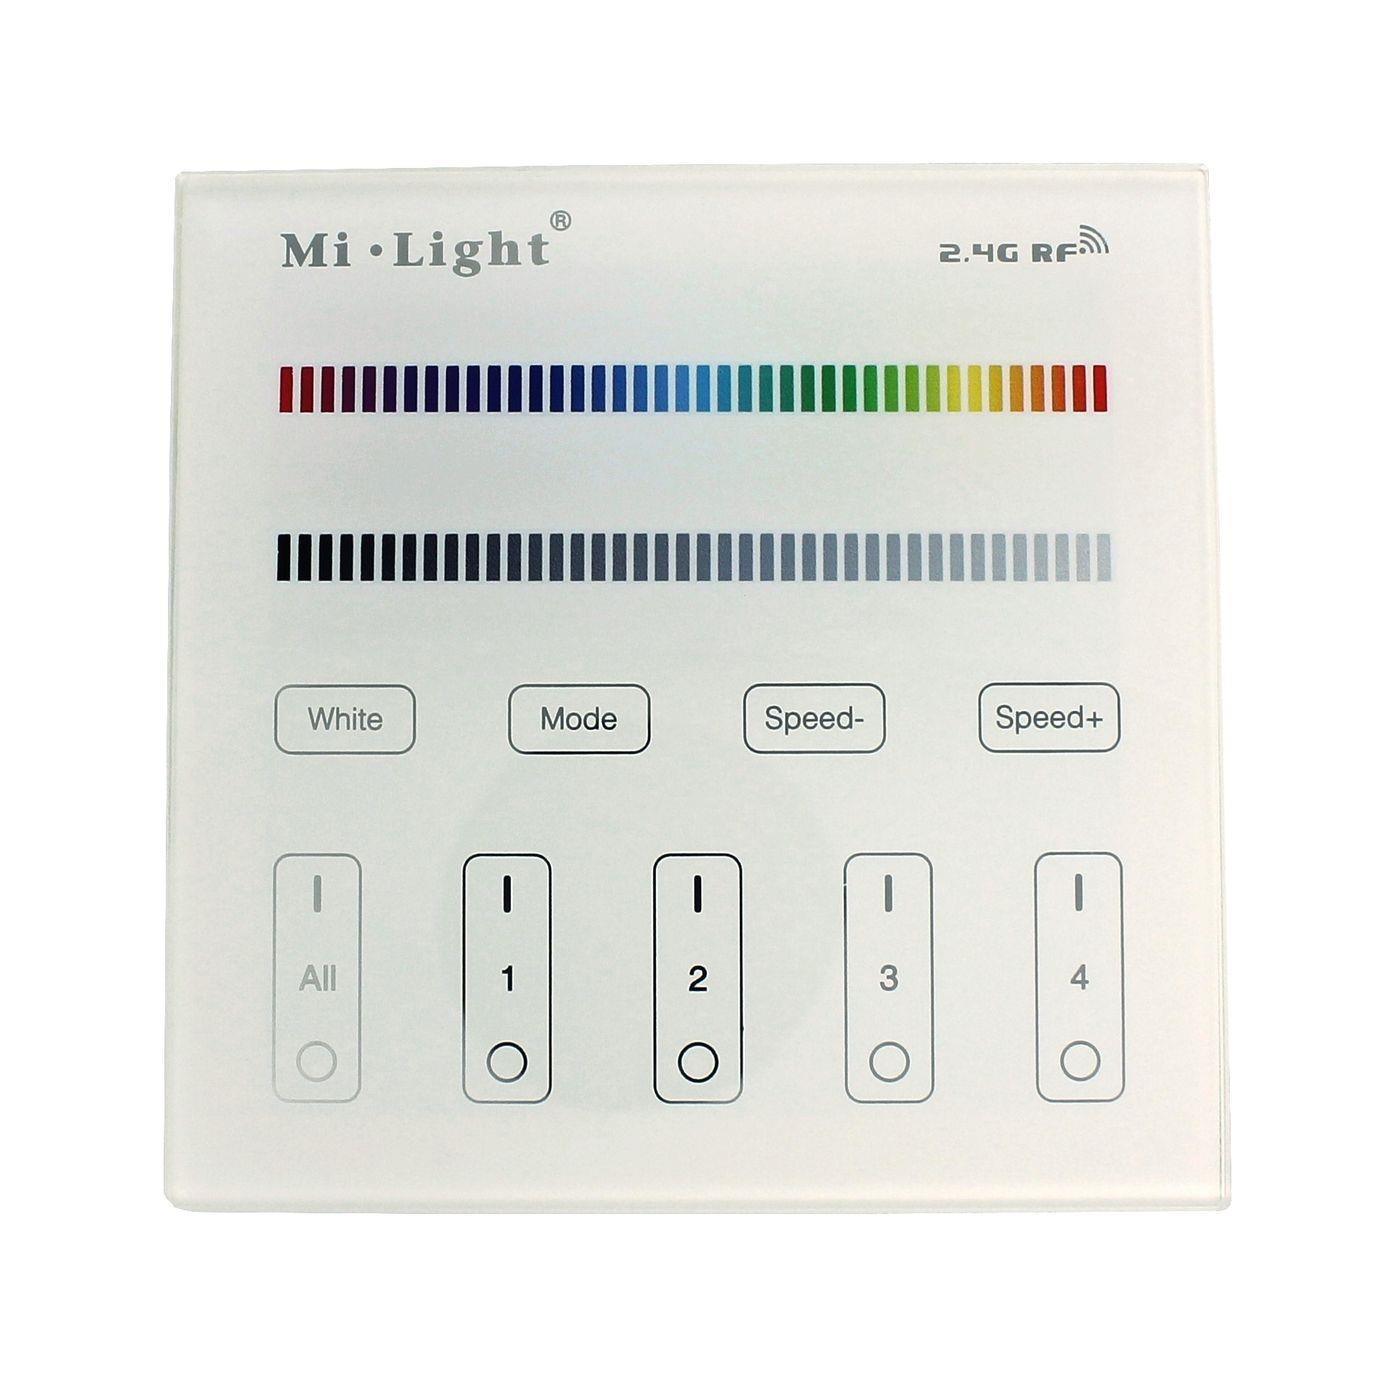 MiLight MiBoxer RGB RGBW LED 4-Zone Wand Touch Panel Controller Batterie für Farbwechsel Streifen 4-Pin + 5-Pin